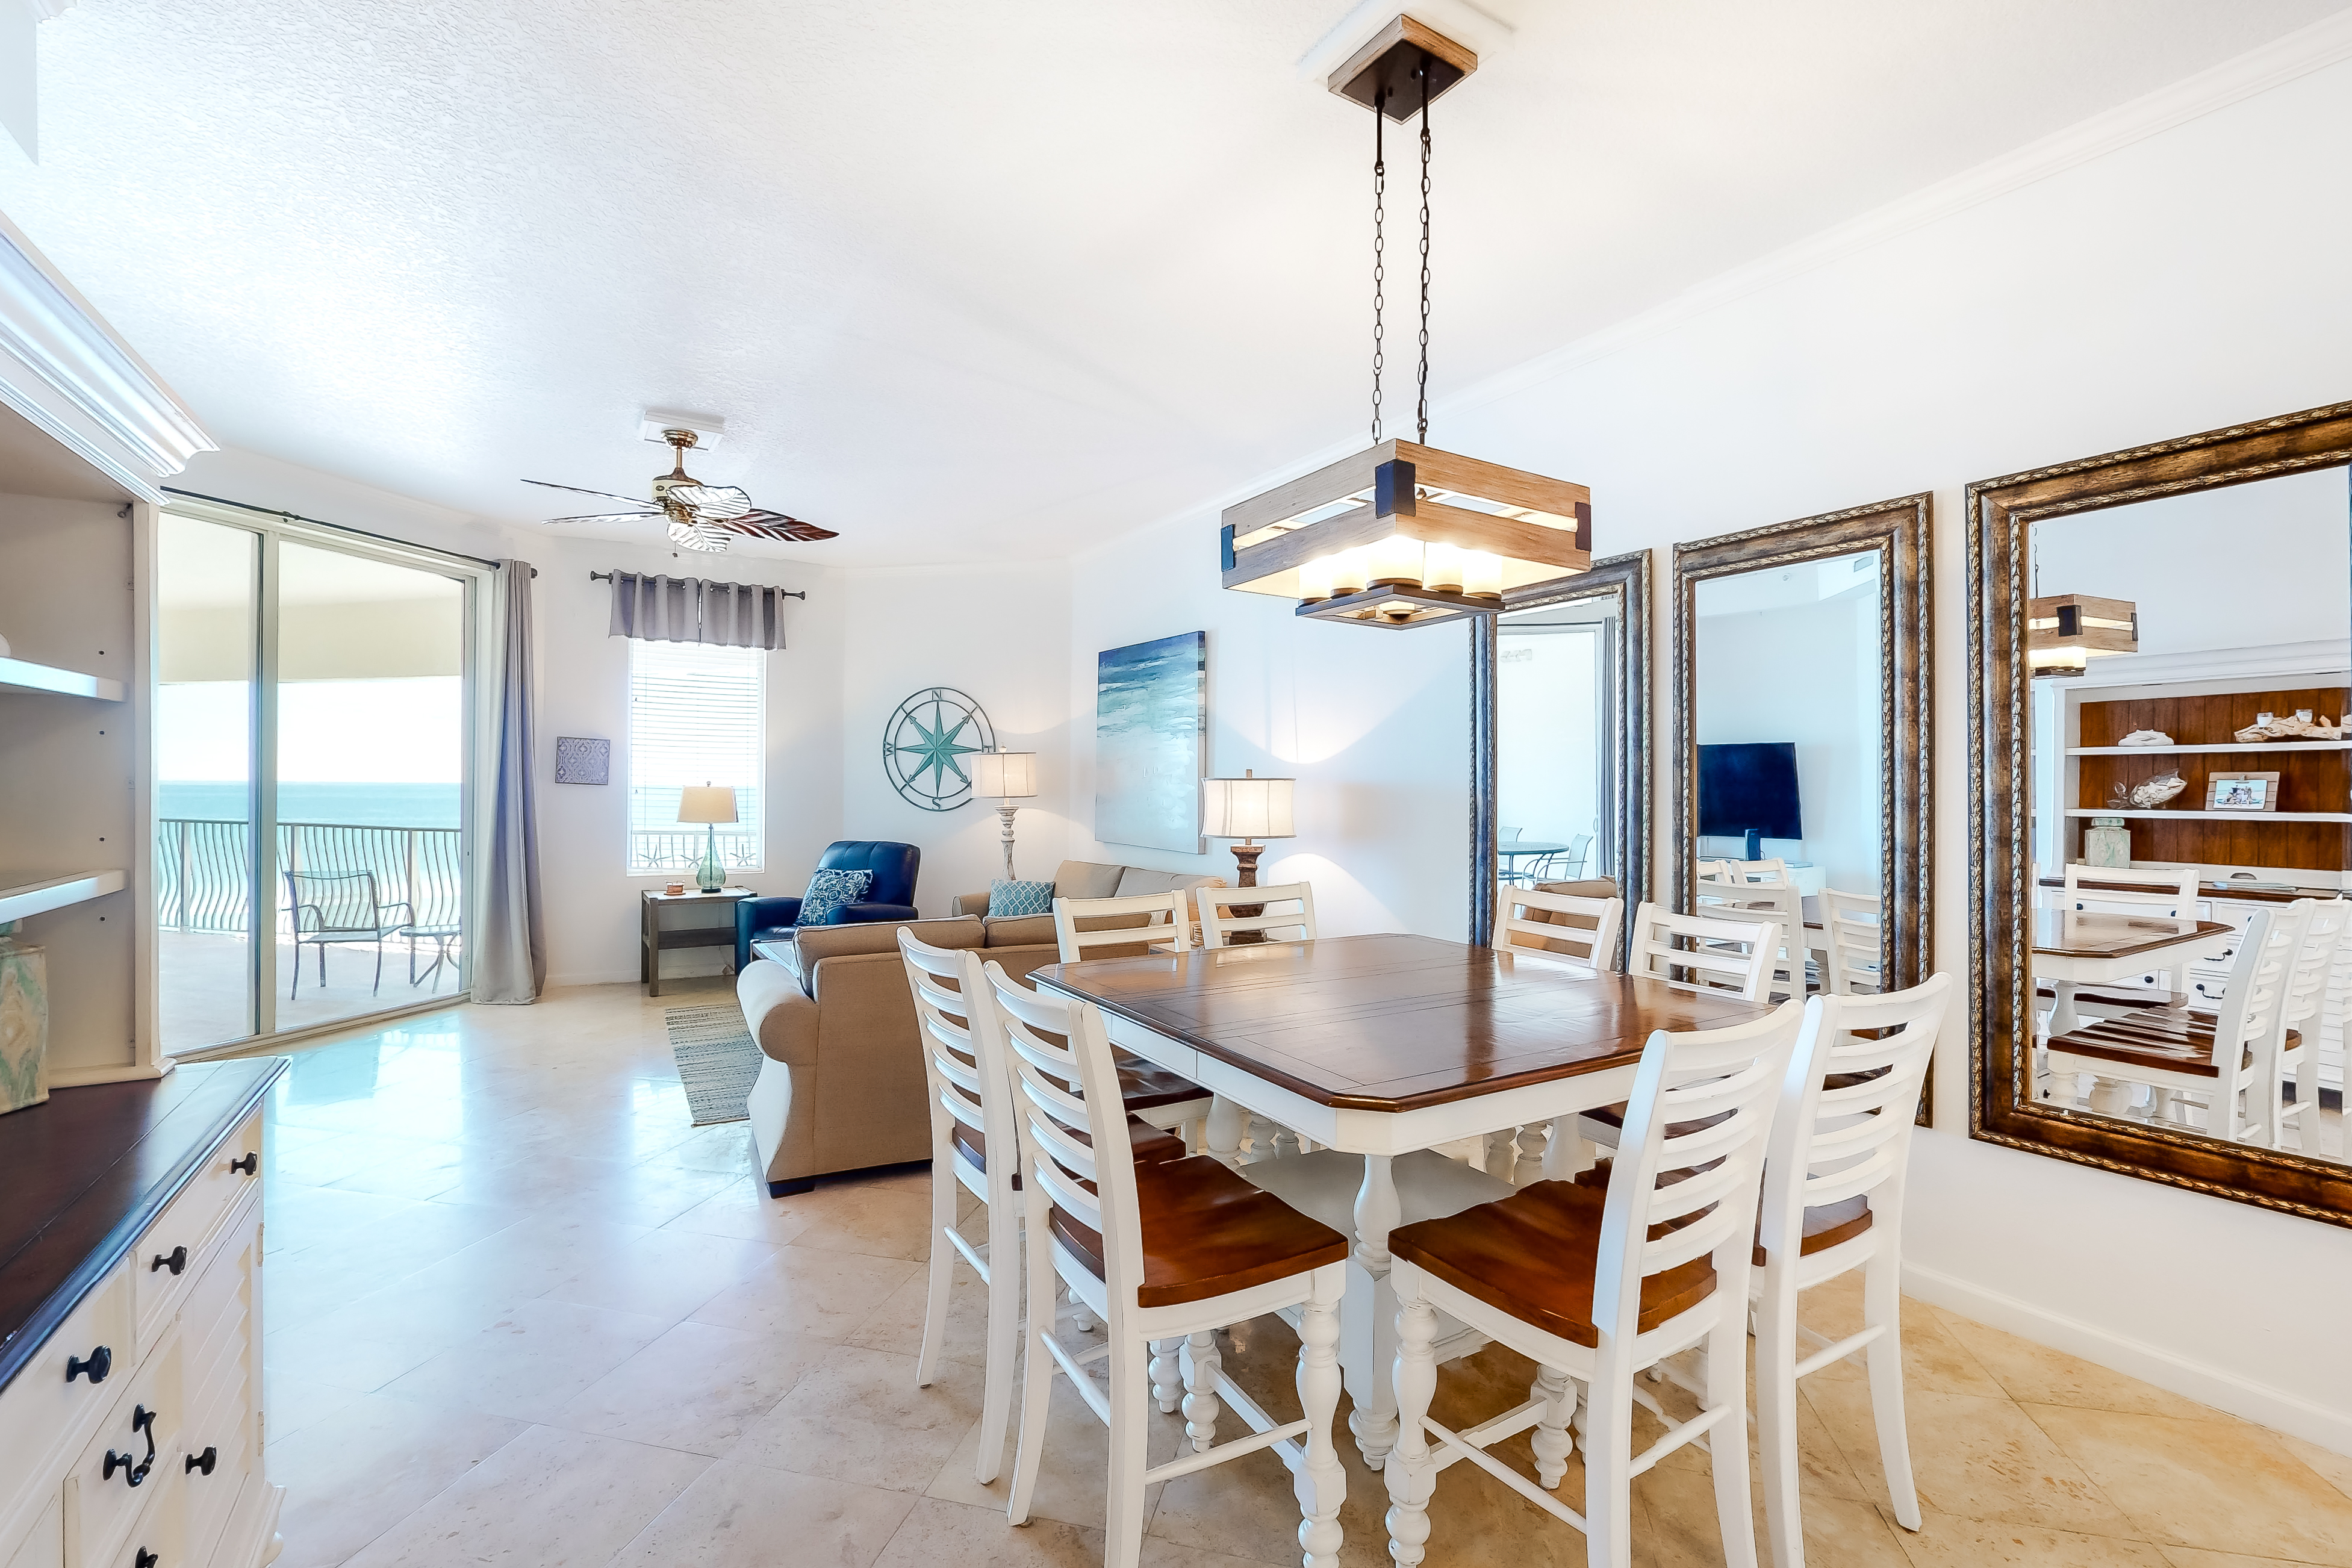 Dunes of Seagrove A408 Condo rental in Dunes of Seagrove in Highway 30-A Florida - #6